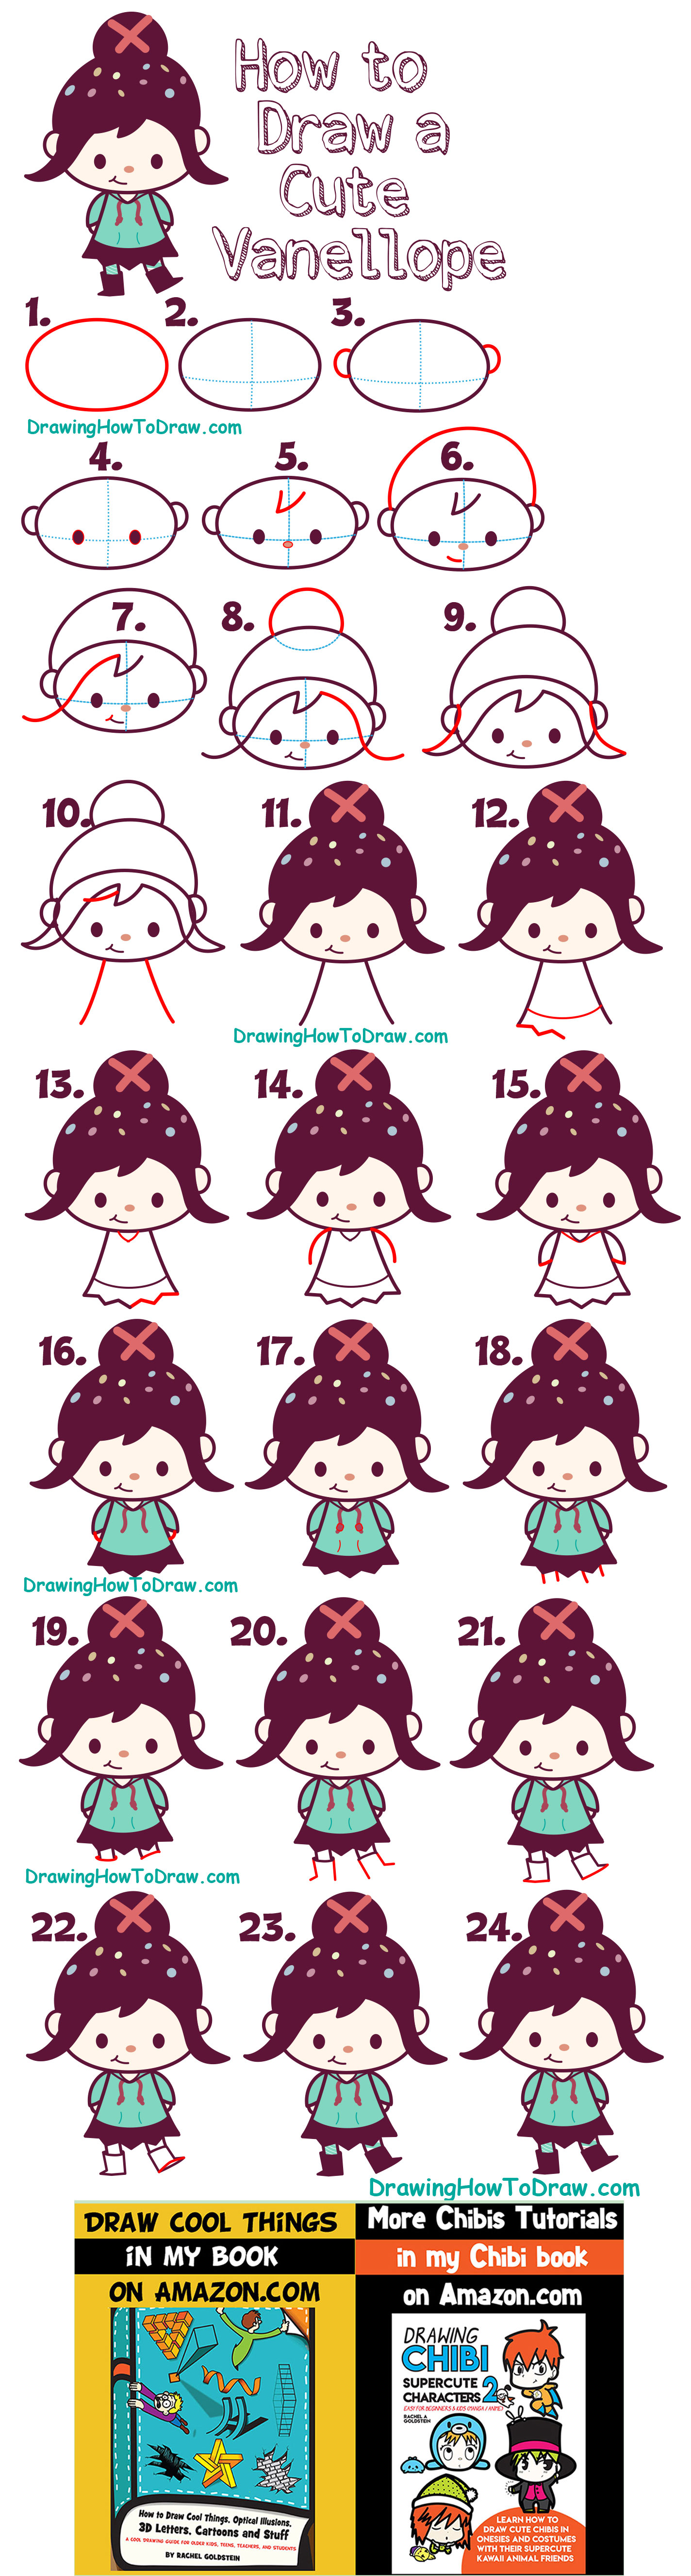 How to Draw Cute Kawaii Chibi Vanellope (Glitch) from Wreck It Ralph 2 - Simple Step by Step Drawing Tutorial for Kids